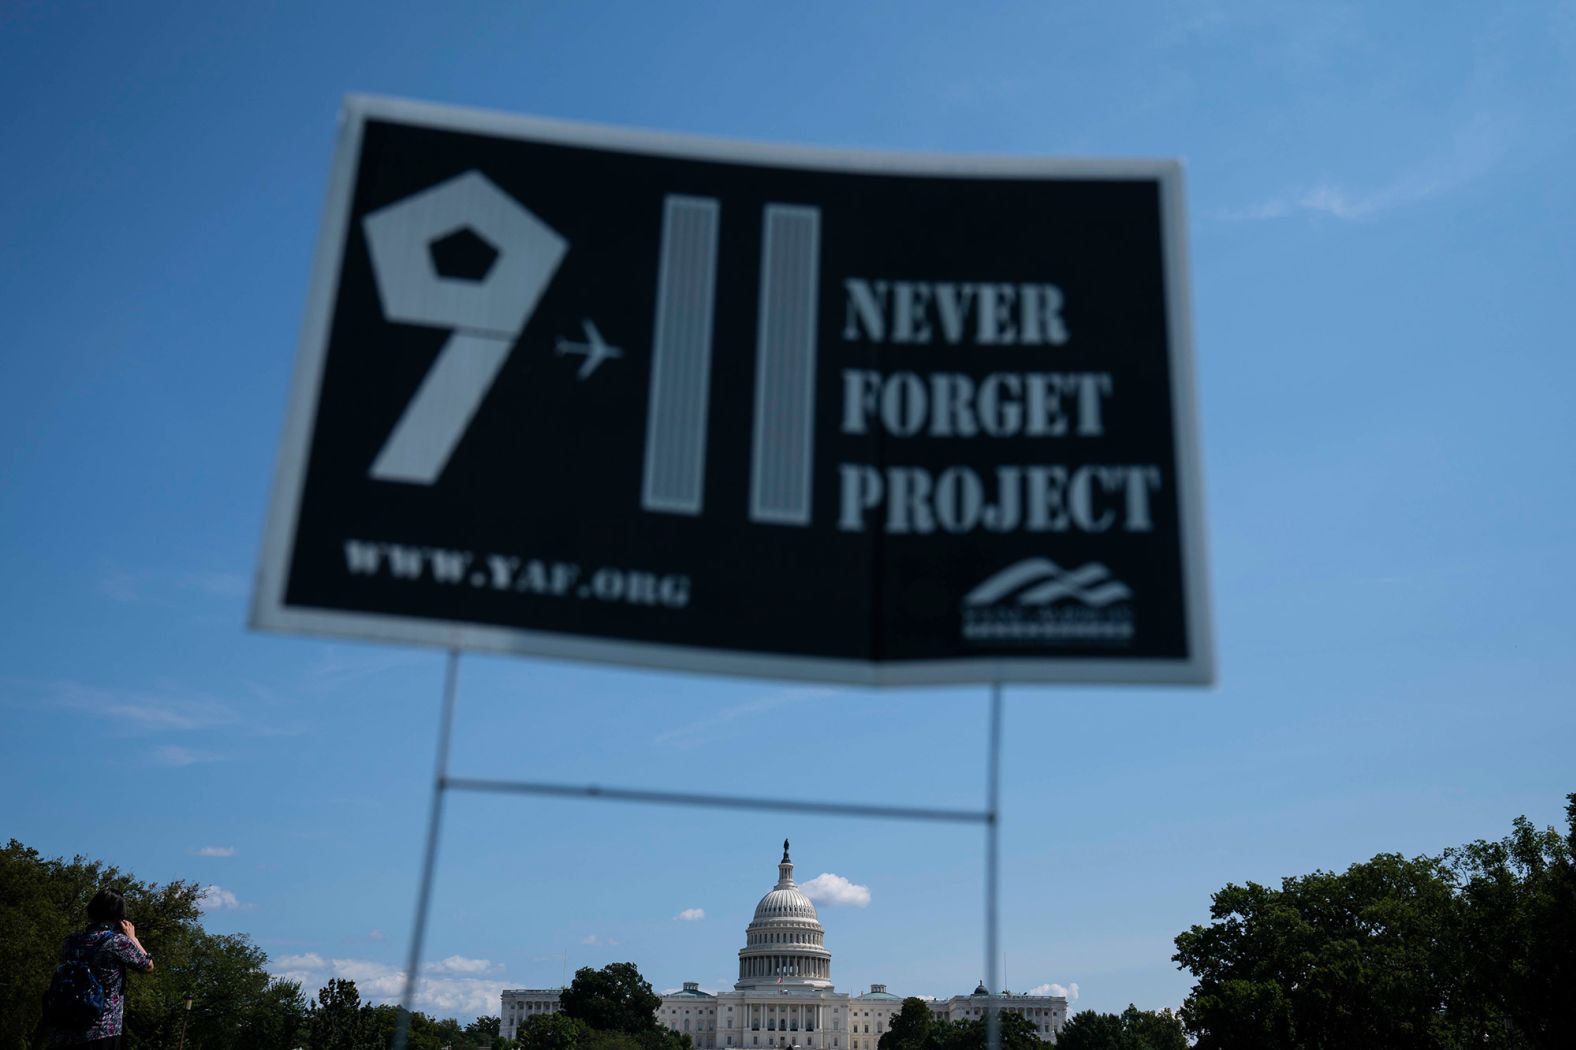 A sign for the 9/11 Never Forget Project is displayed on the National Mall in Washington, DC. Young America's Foundation, a conservative youth organization, created the project.